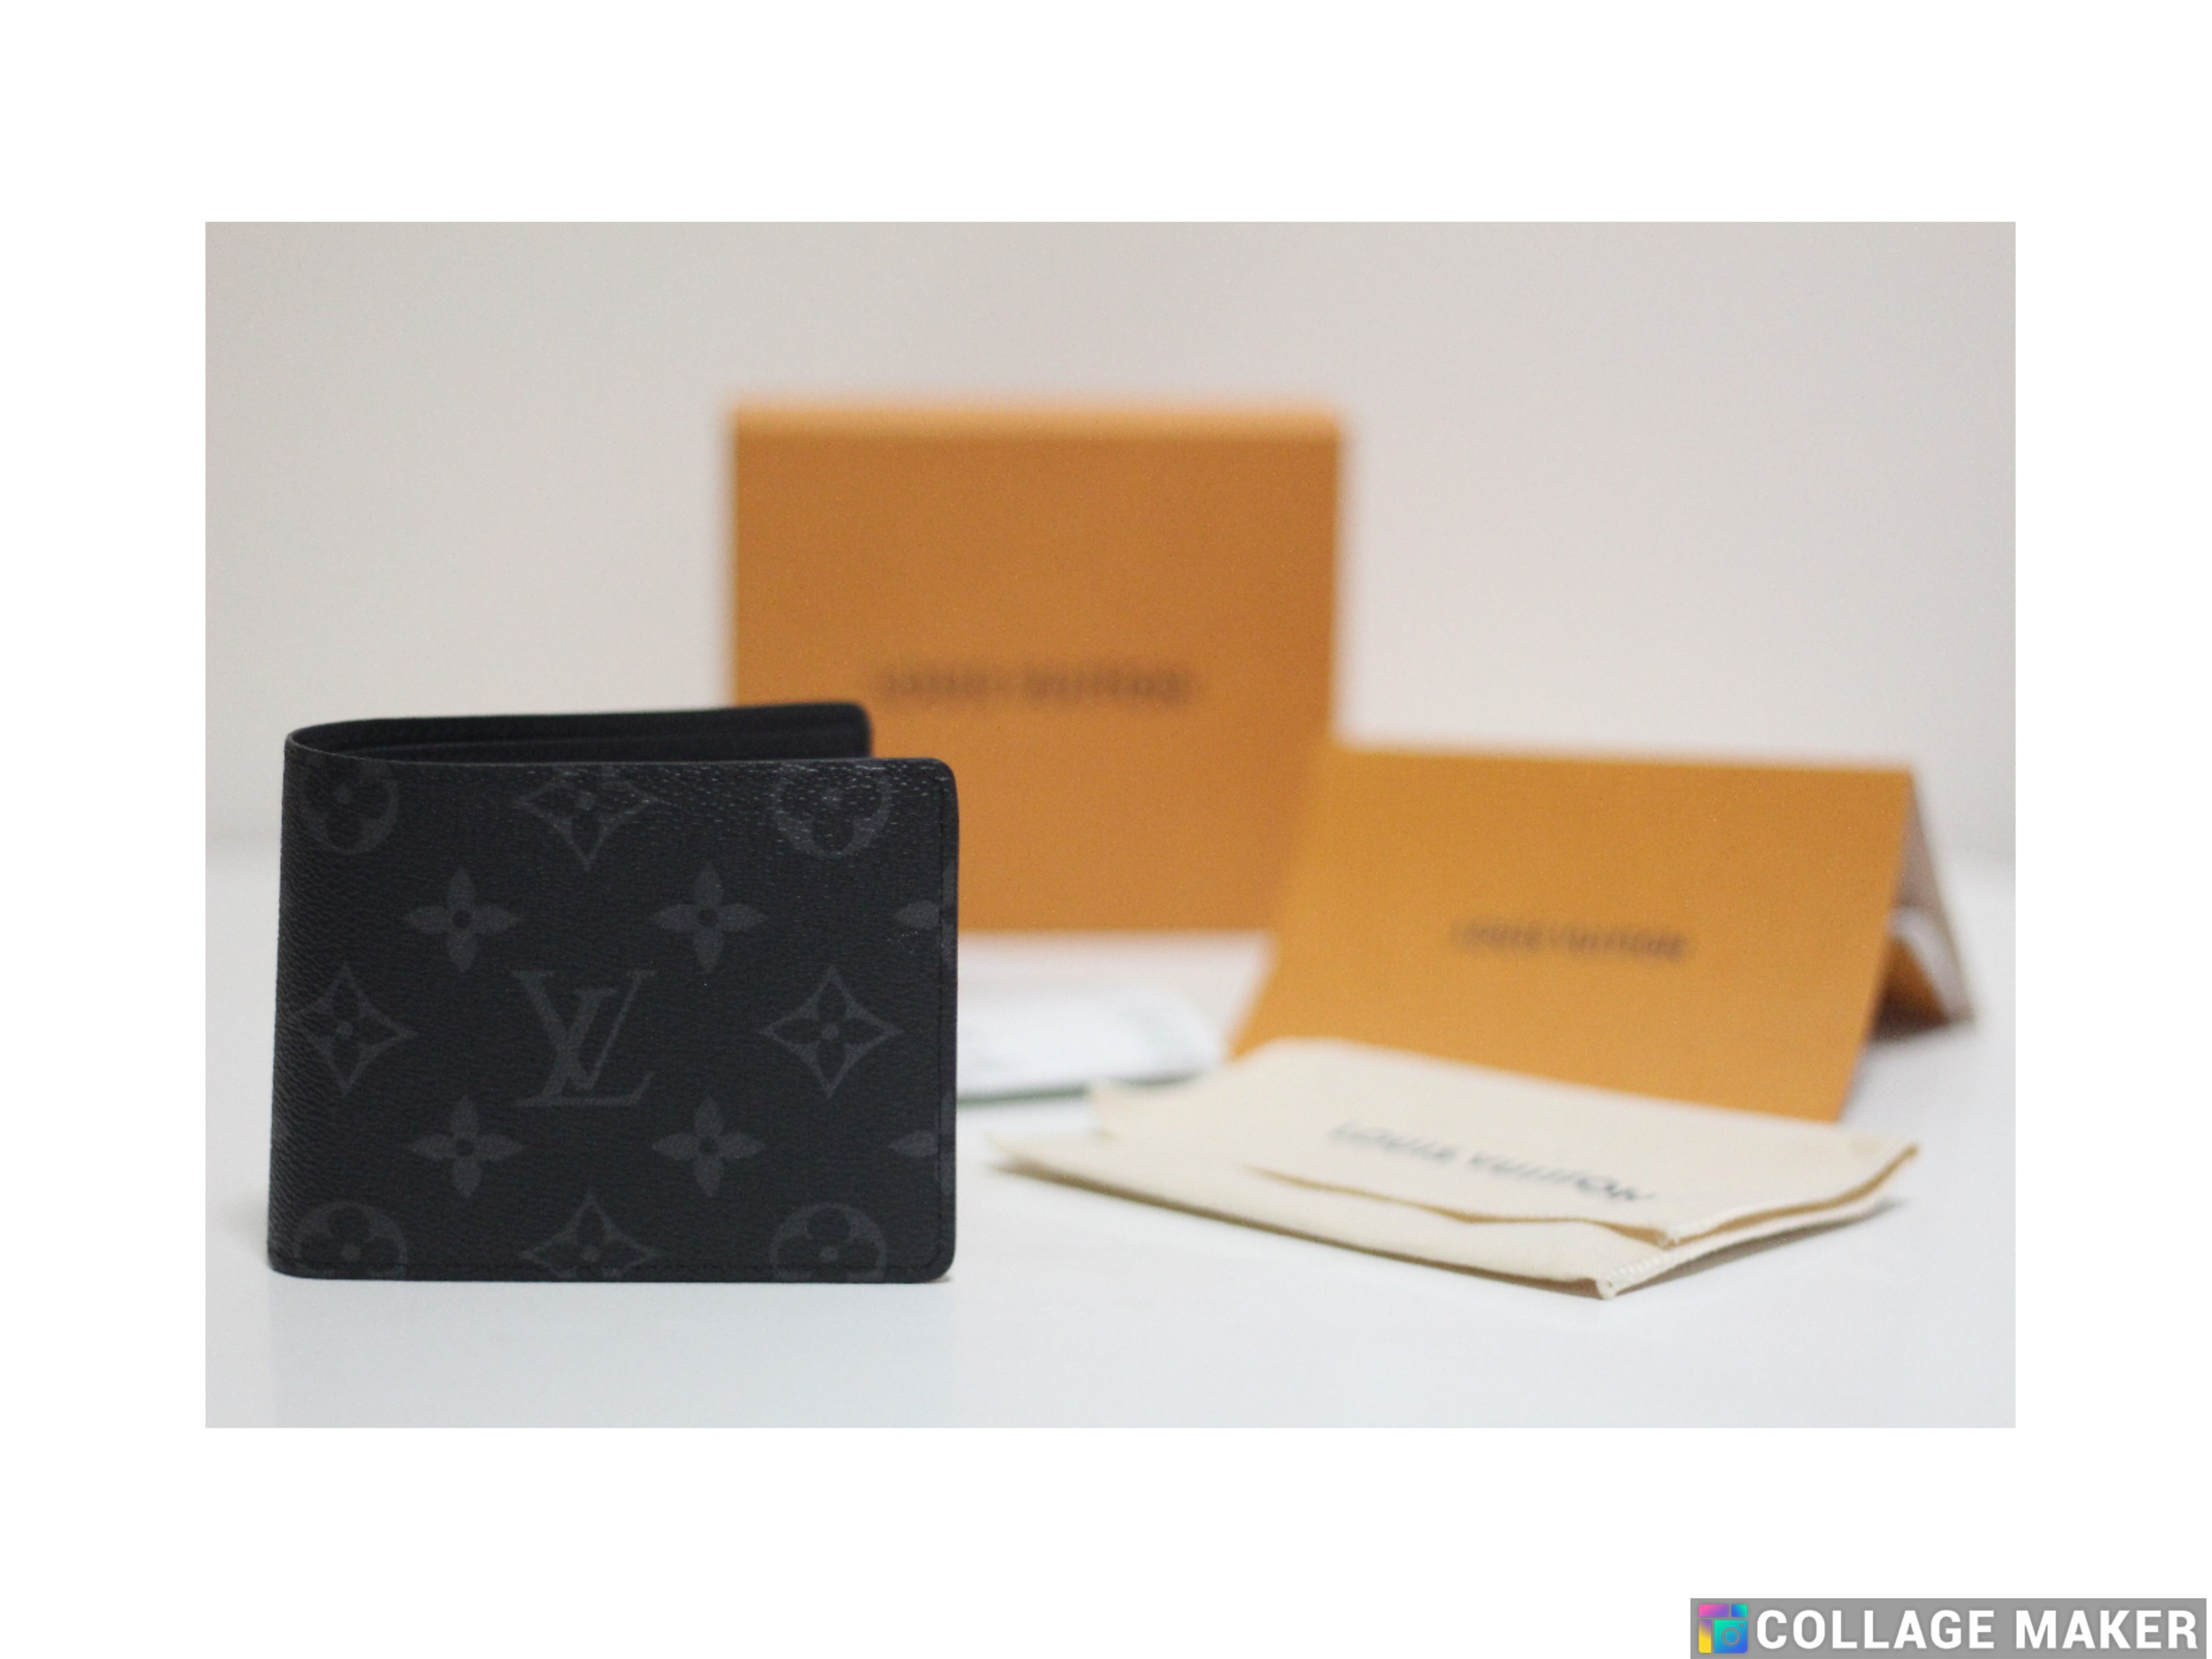 Retail $790 - New in box Louis Vuitton M61695, made in France ...